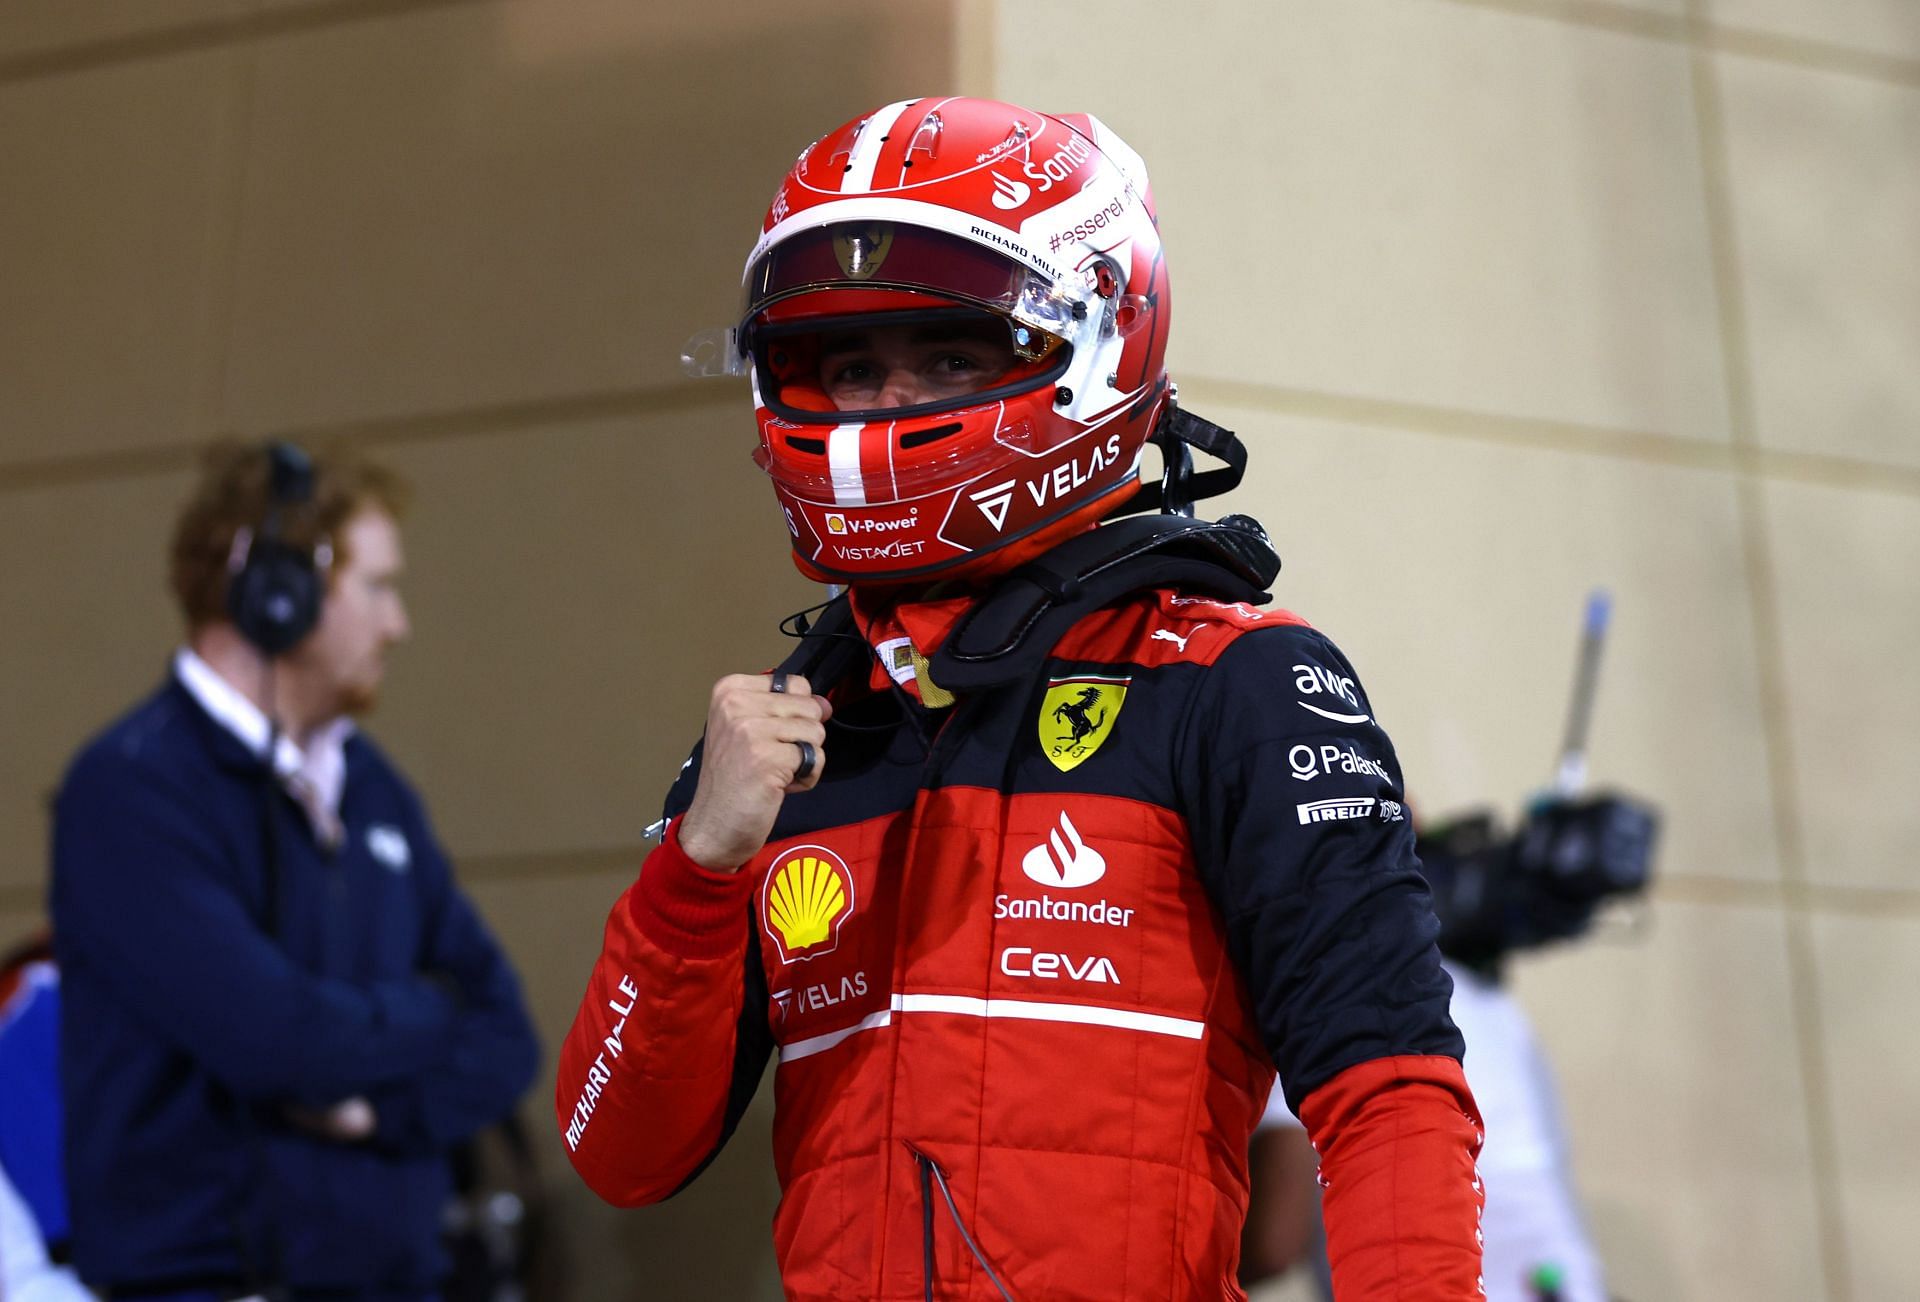 Charles Leclerc celebrates after securing pole at the F1 Grand Prix of Bahrain - Qualifying